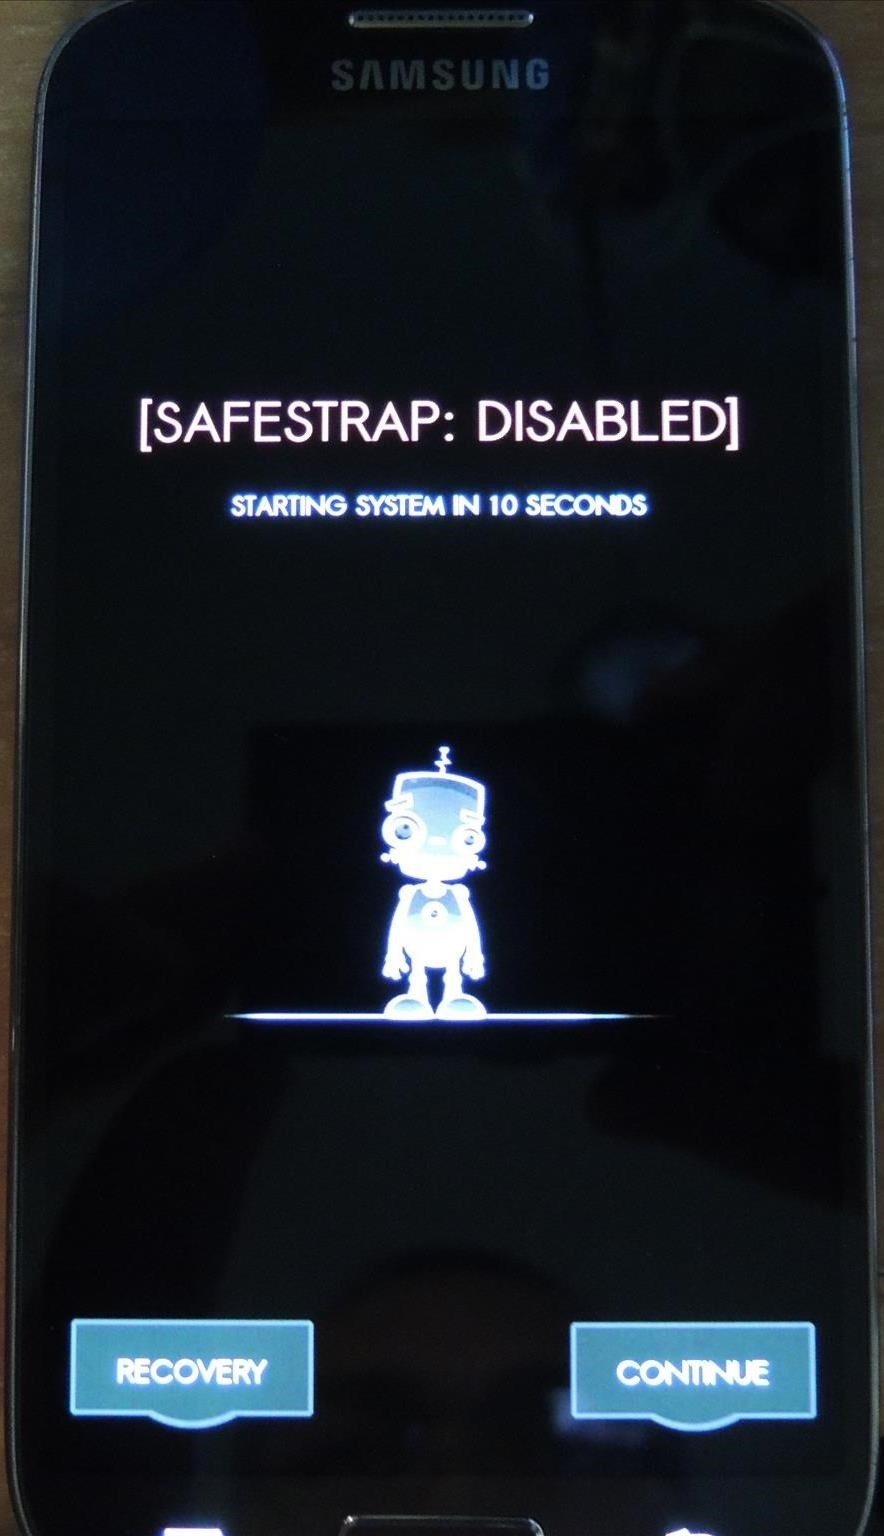 How to Install a Custom Recovery & New ROM on Your Bootloader-Locked Samsung Galaxy S4